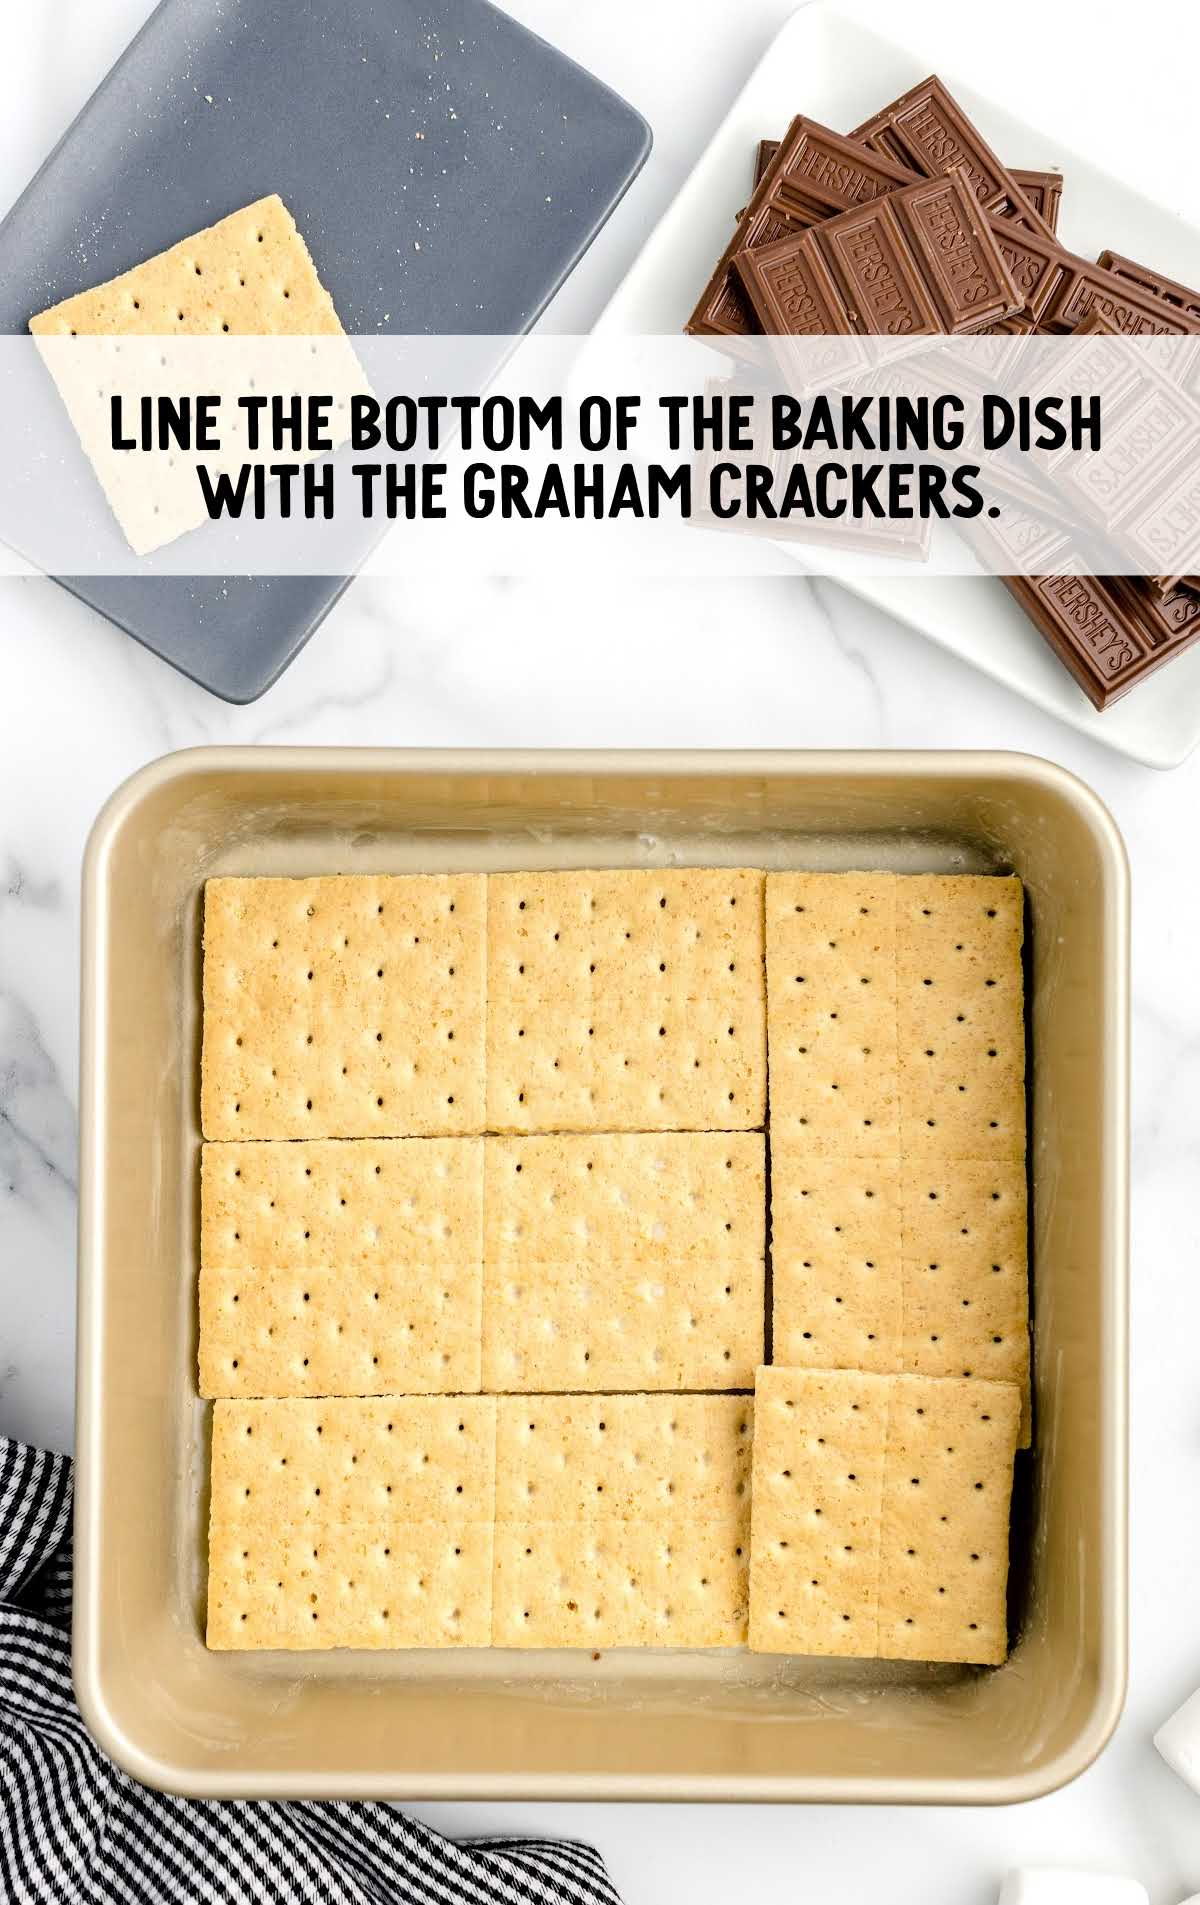 graham crackers placed on the bottom of the baking dish